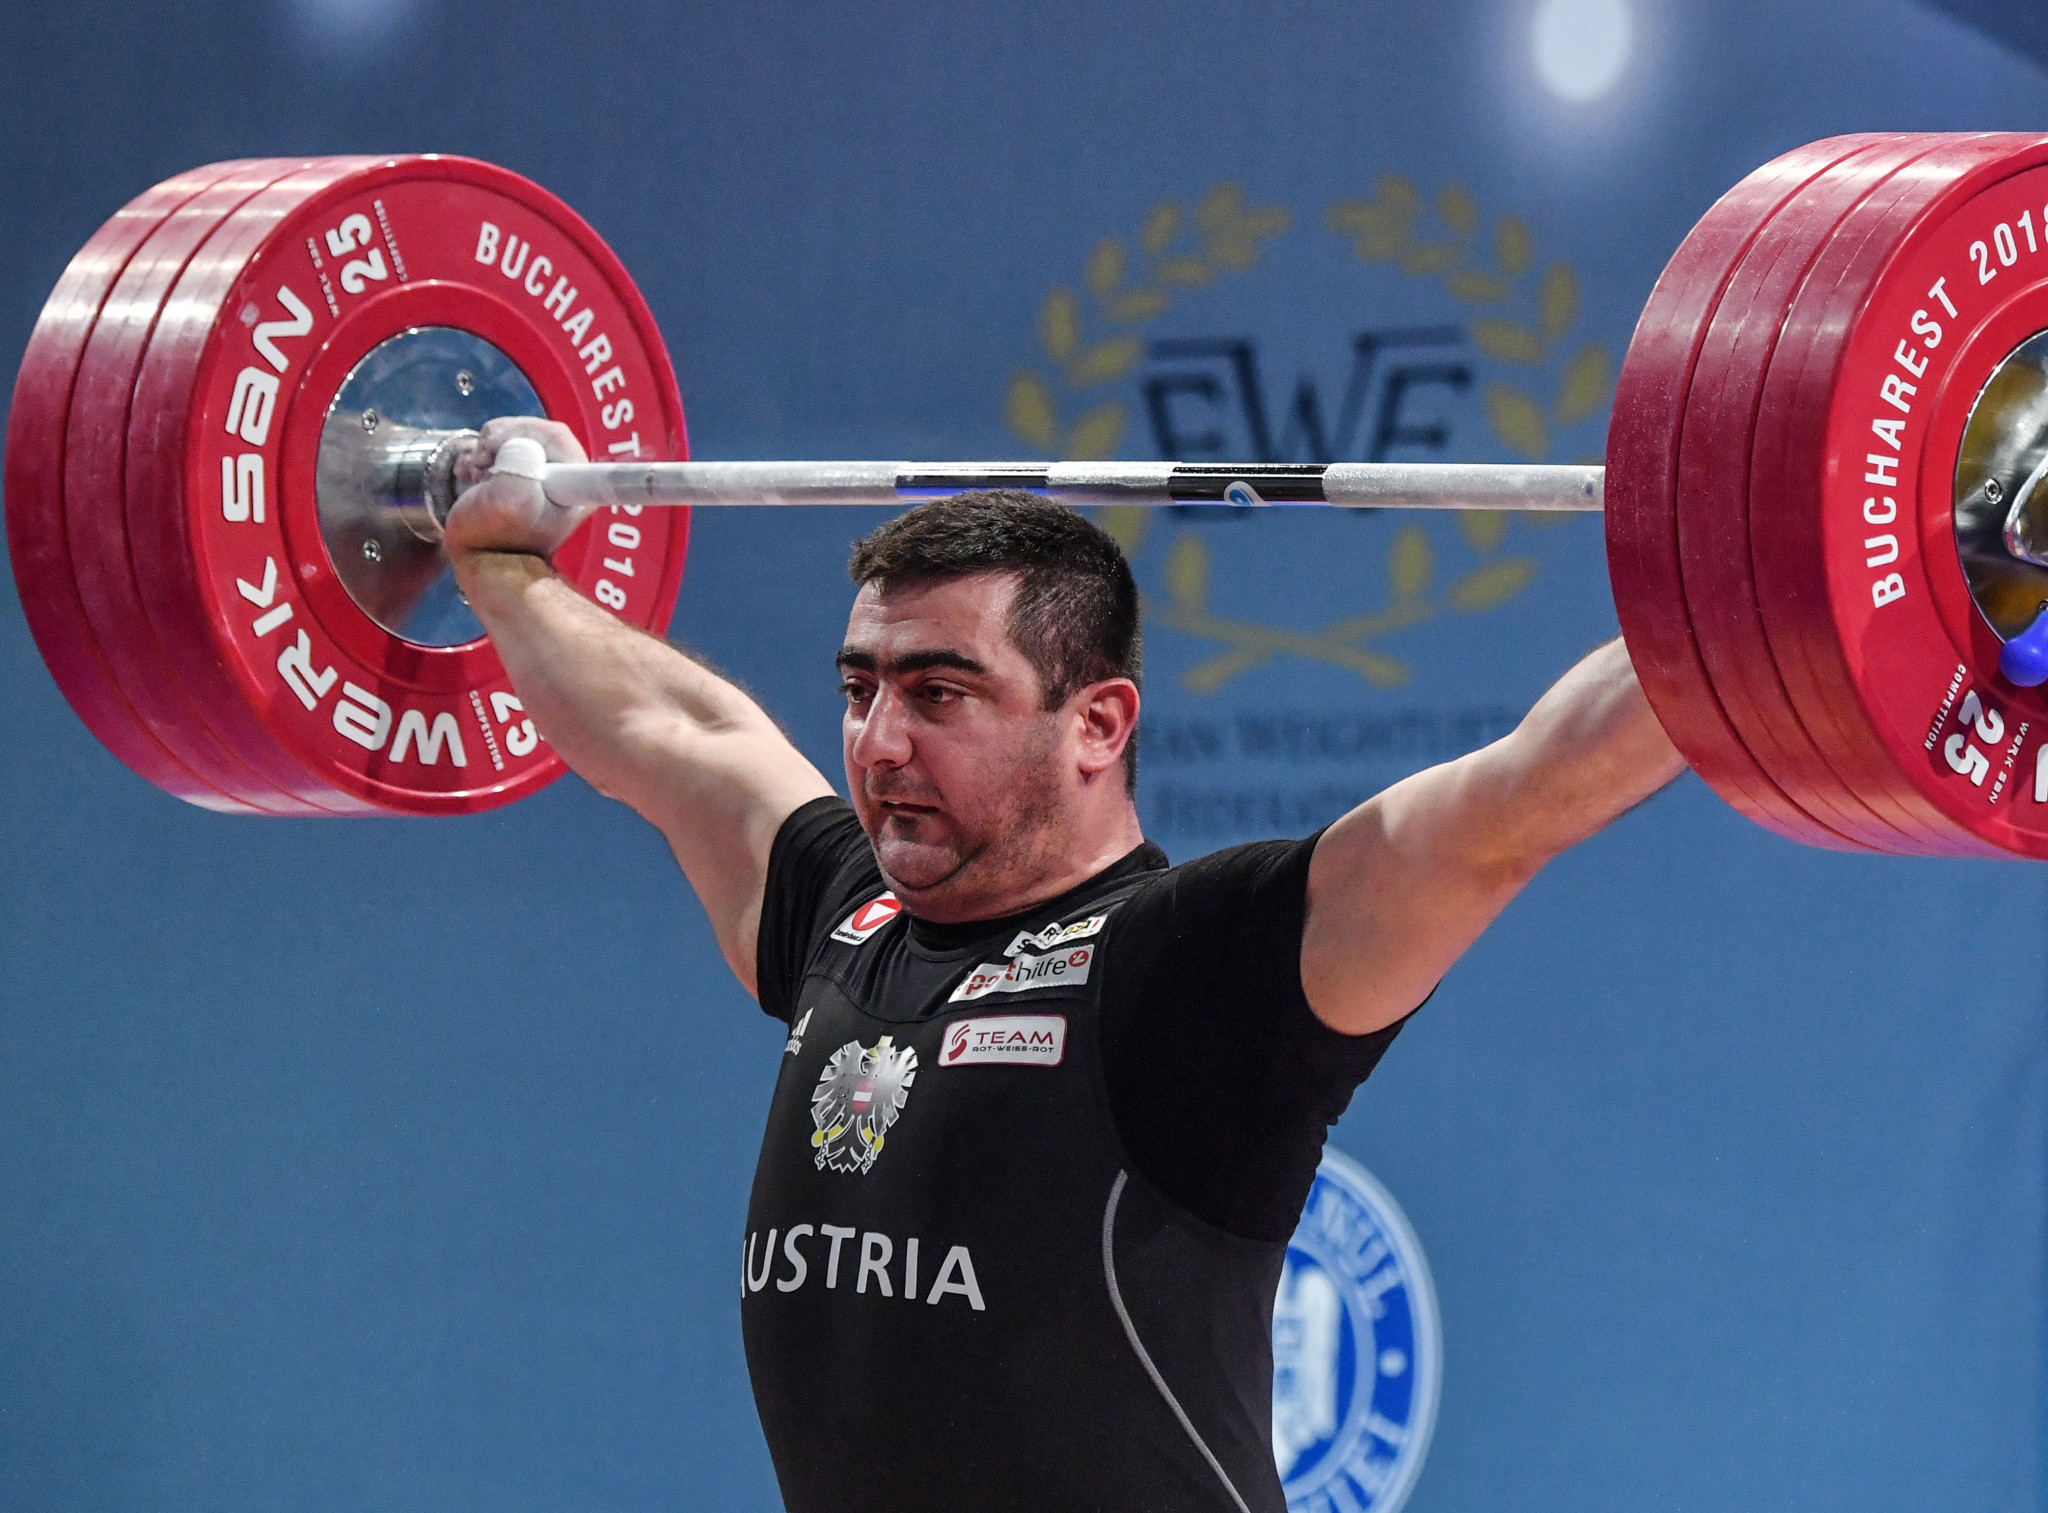 European Weightlifting Championships organisers request countries confirm intent to compete